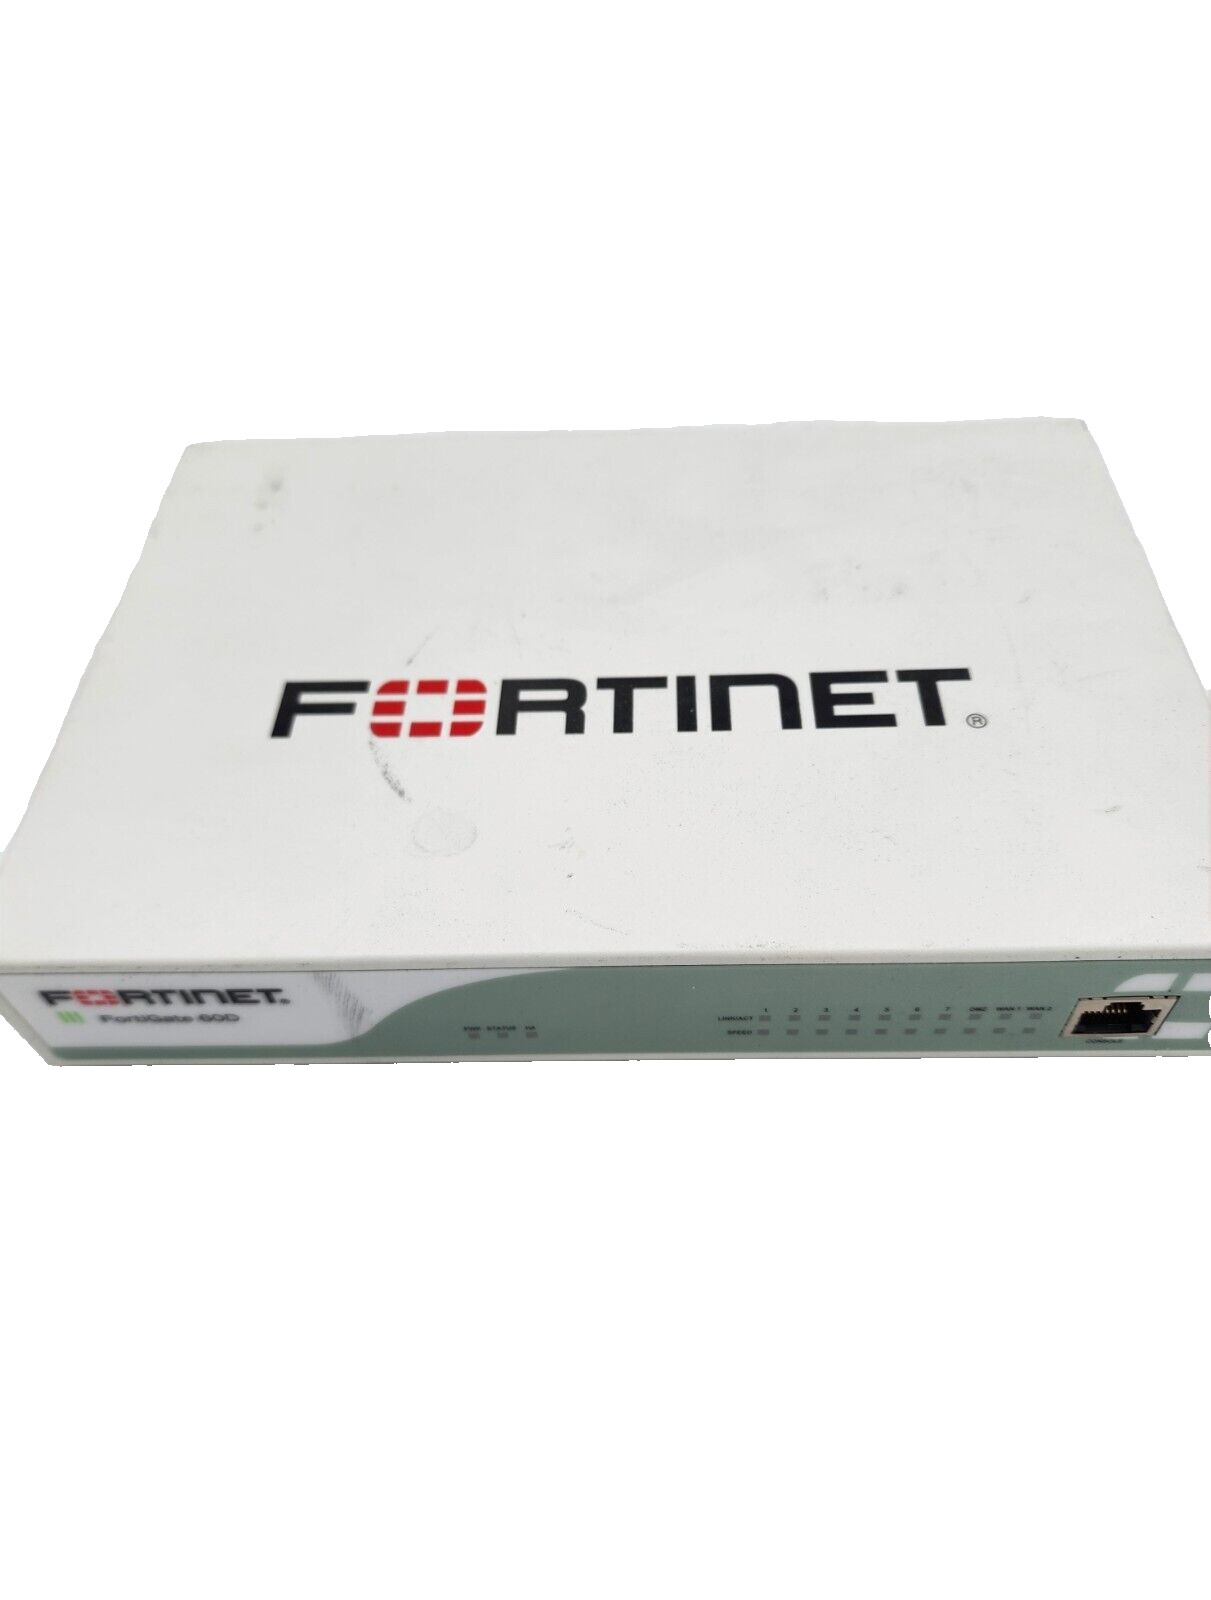 Fortinet Fortiwifi 60D FG-60D Security Appliance Firewall / VPN FAST SHIPPING